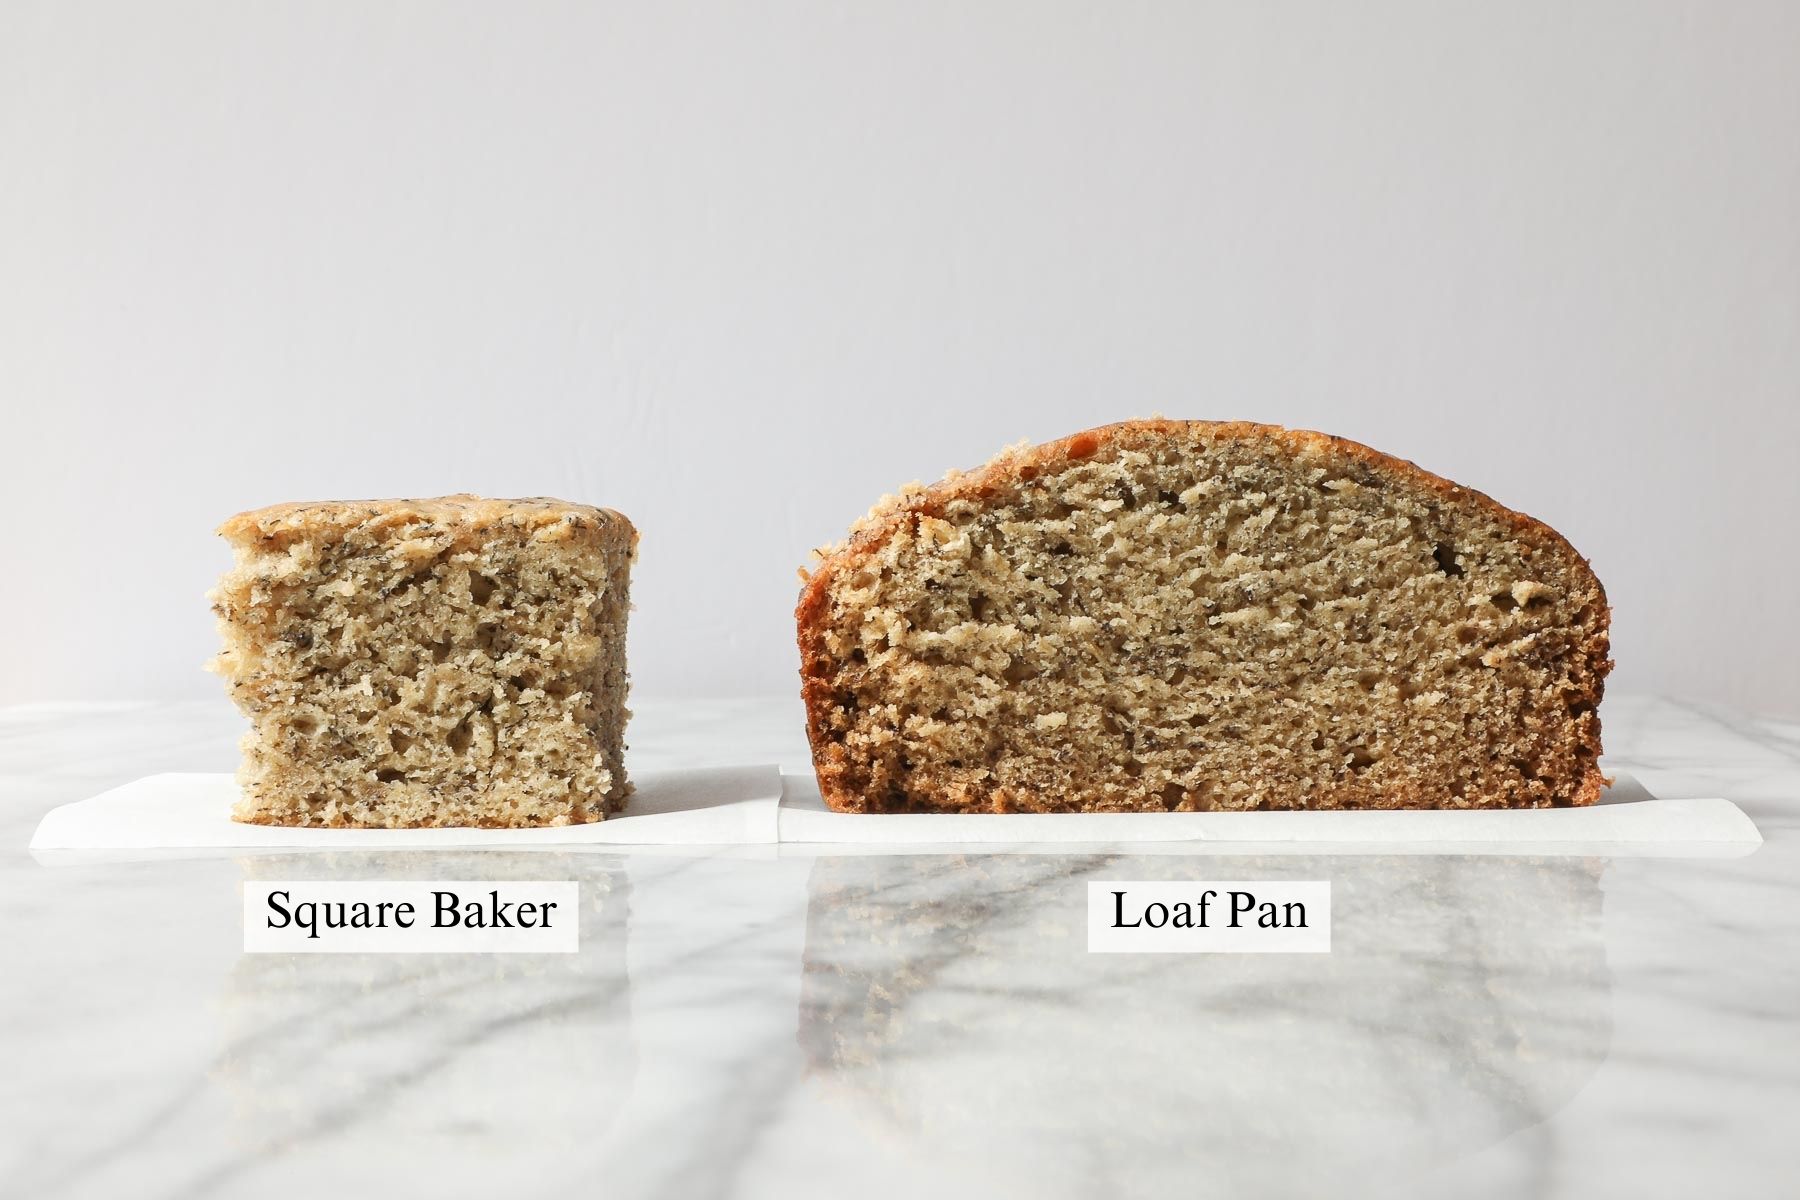 A side by side comparison of slice of banana bread from a square baker and a cross section of banana bread from a loaf pan.